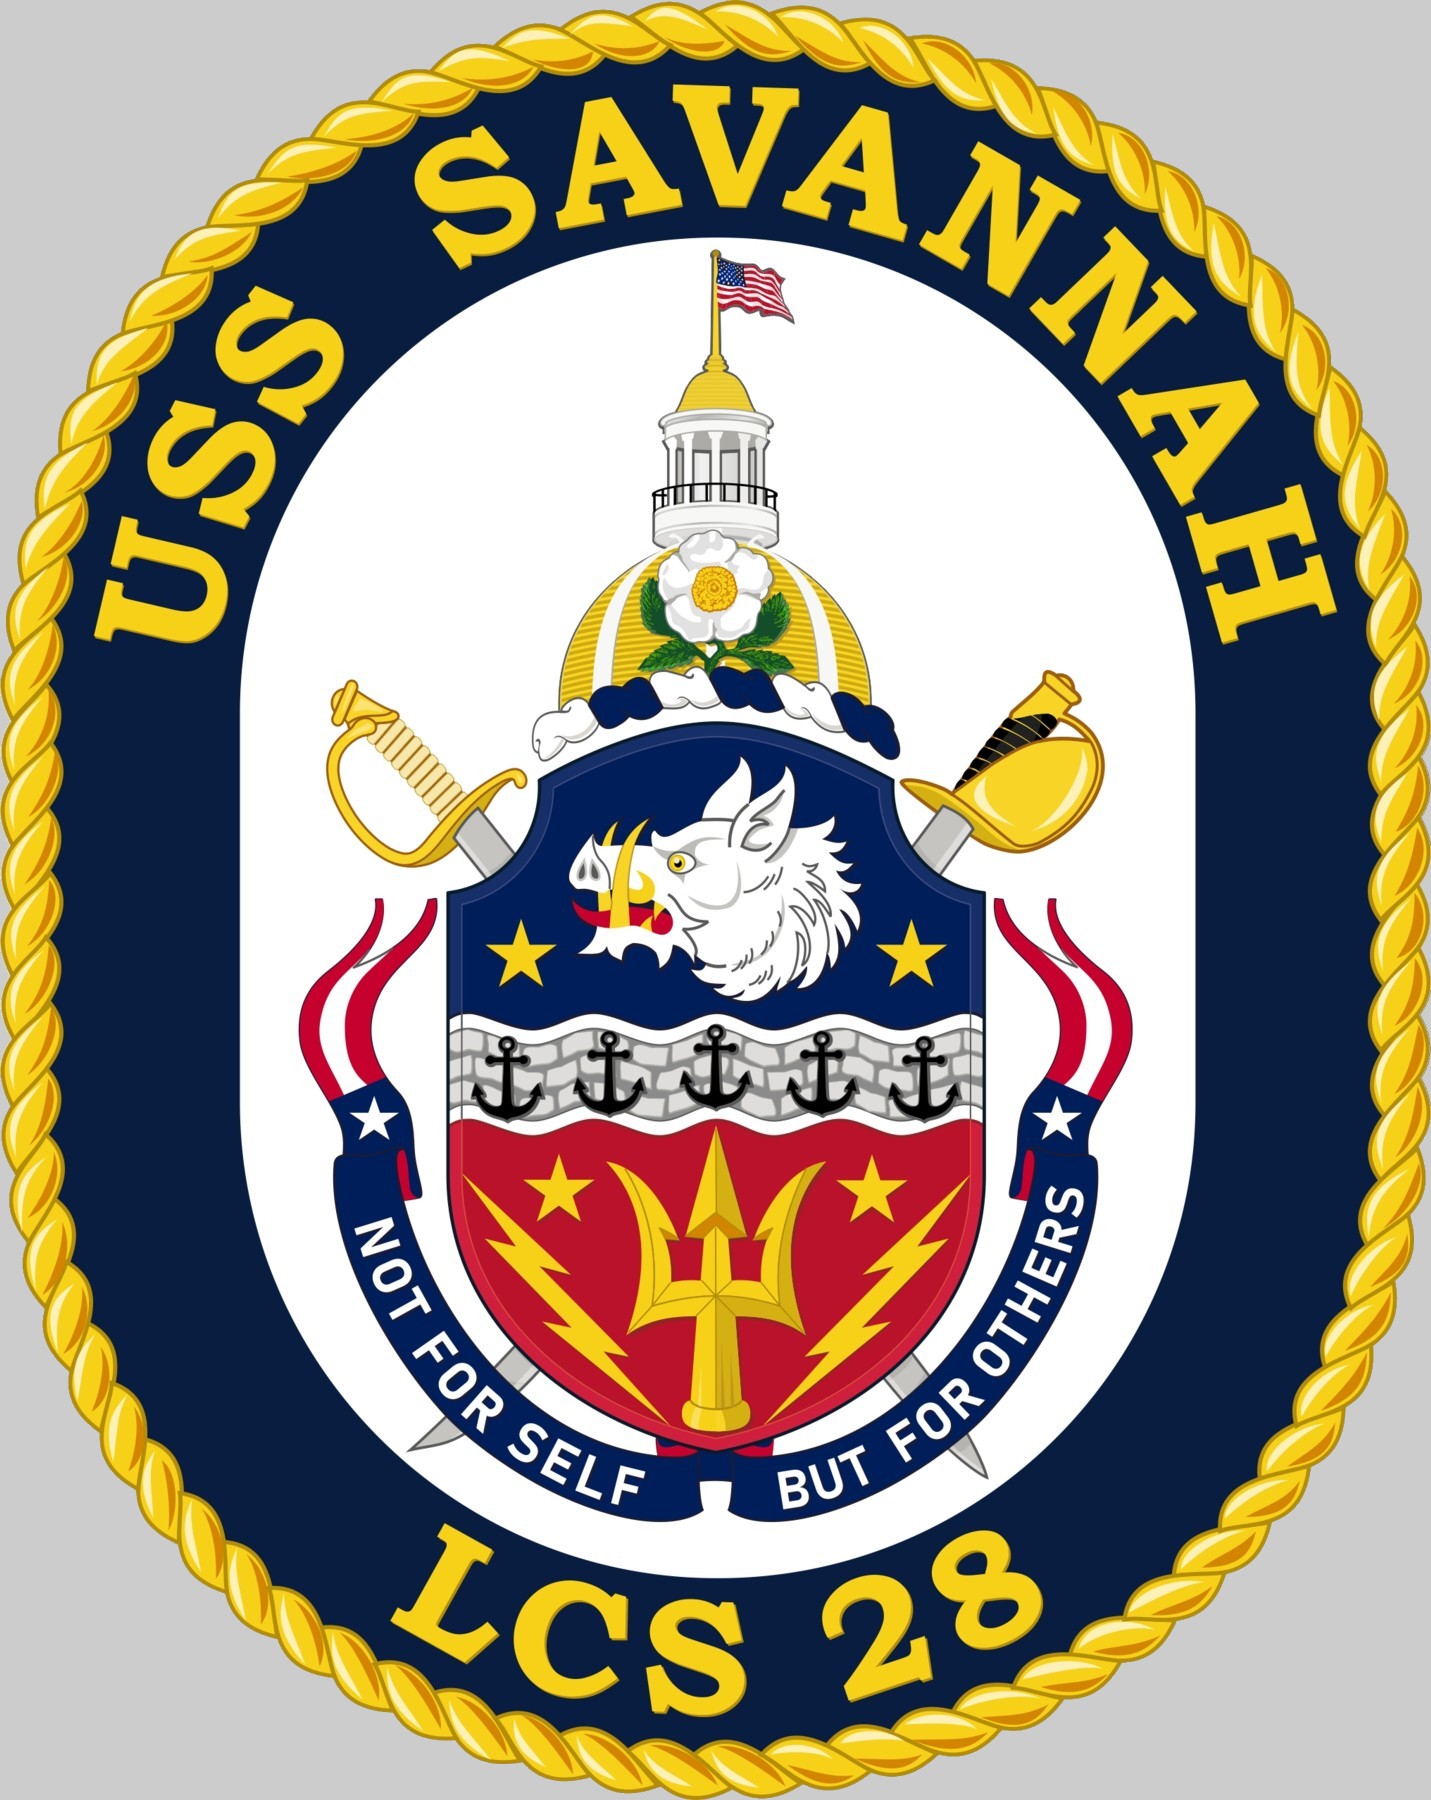 lcs-28 uss savannah insignia crest patch badge independence class littoral combat ship us navy 02x